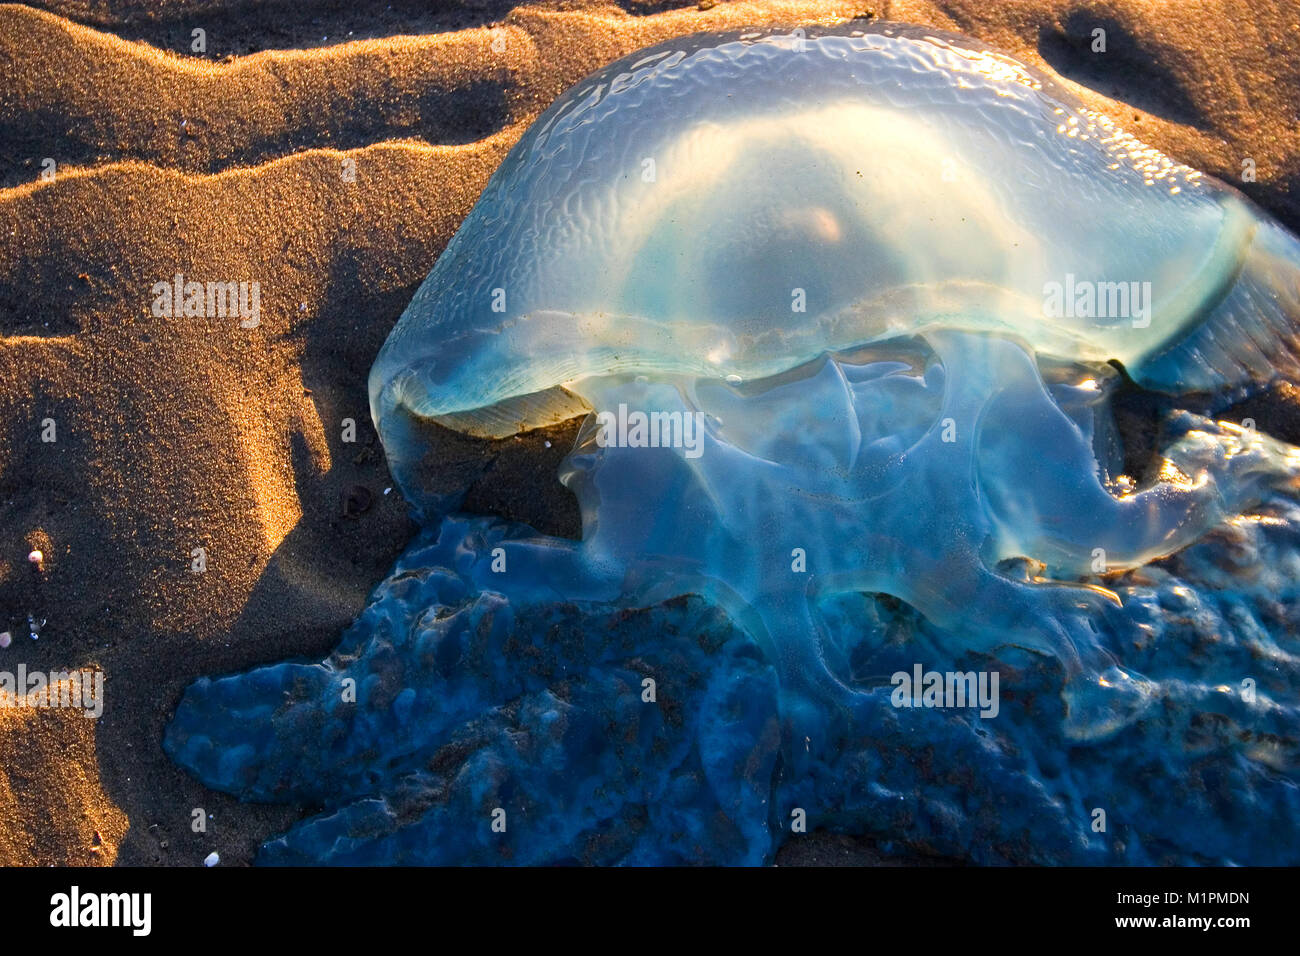 A dead box jelly fish that has been stranded on a beach with golden hour sunlight shining through its translucent bell dome. The sand is rippled with  Stock Photo